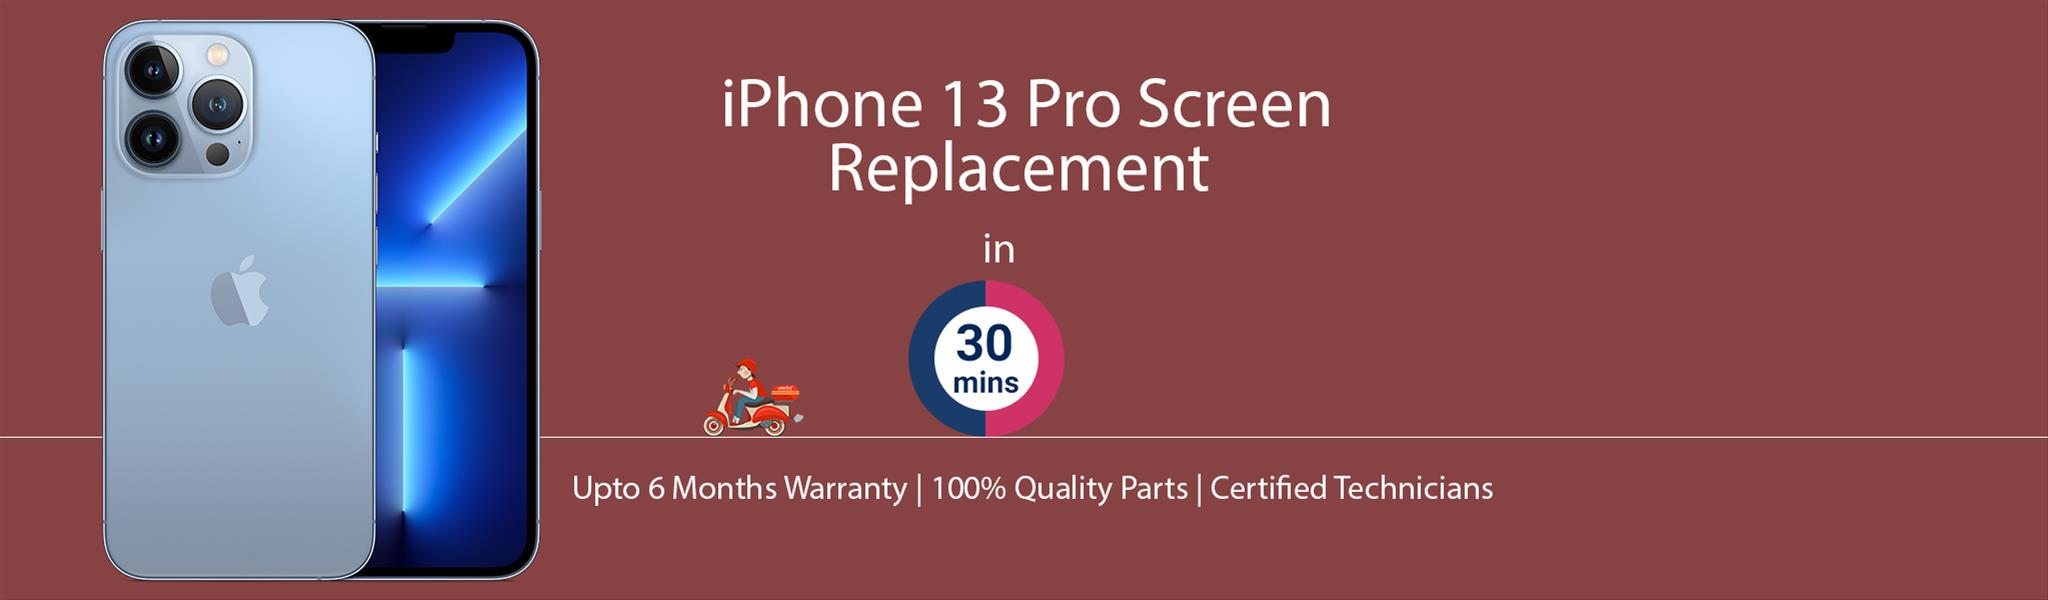 iphone-13-pro-screen-replacement.jpg